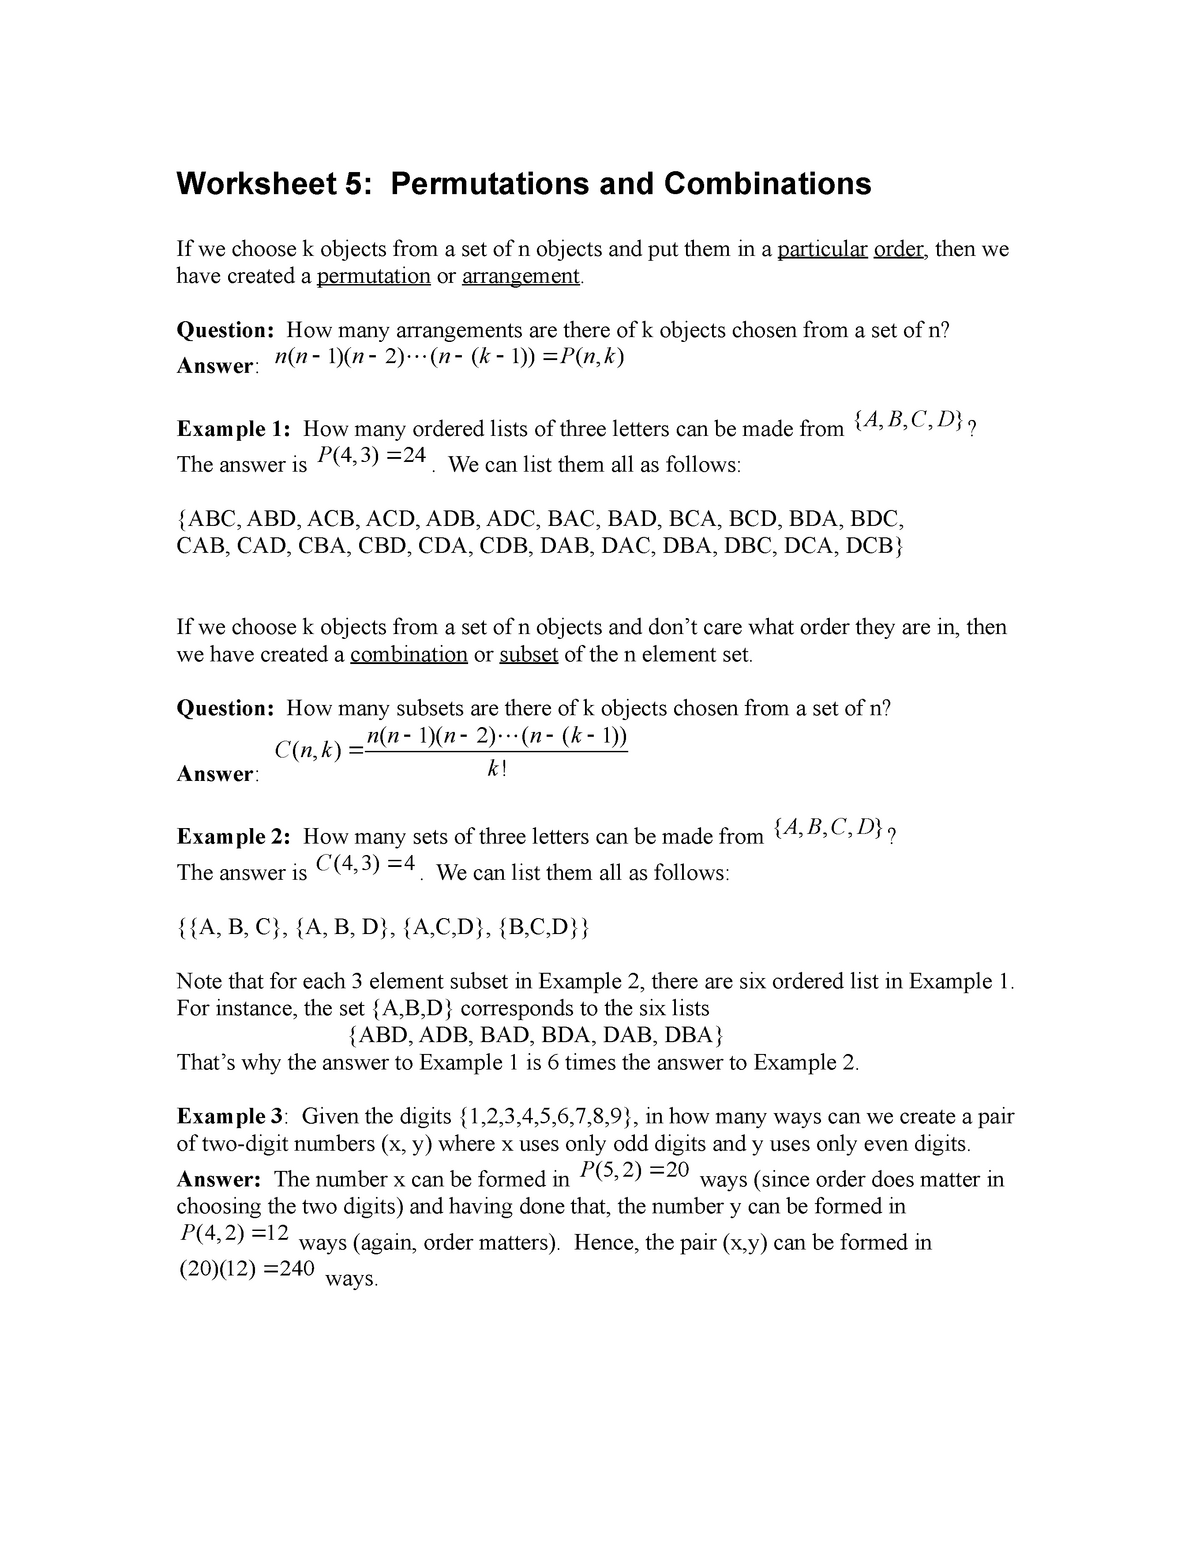 22 worksheet 22 with answers - Worksheet 22: Permutations and For Permutations And Combinations Worksheet Answers